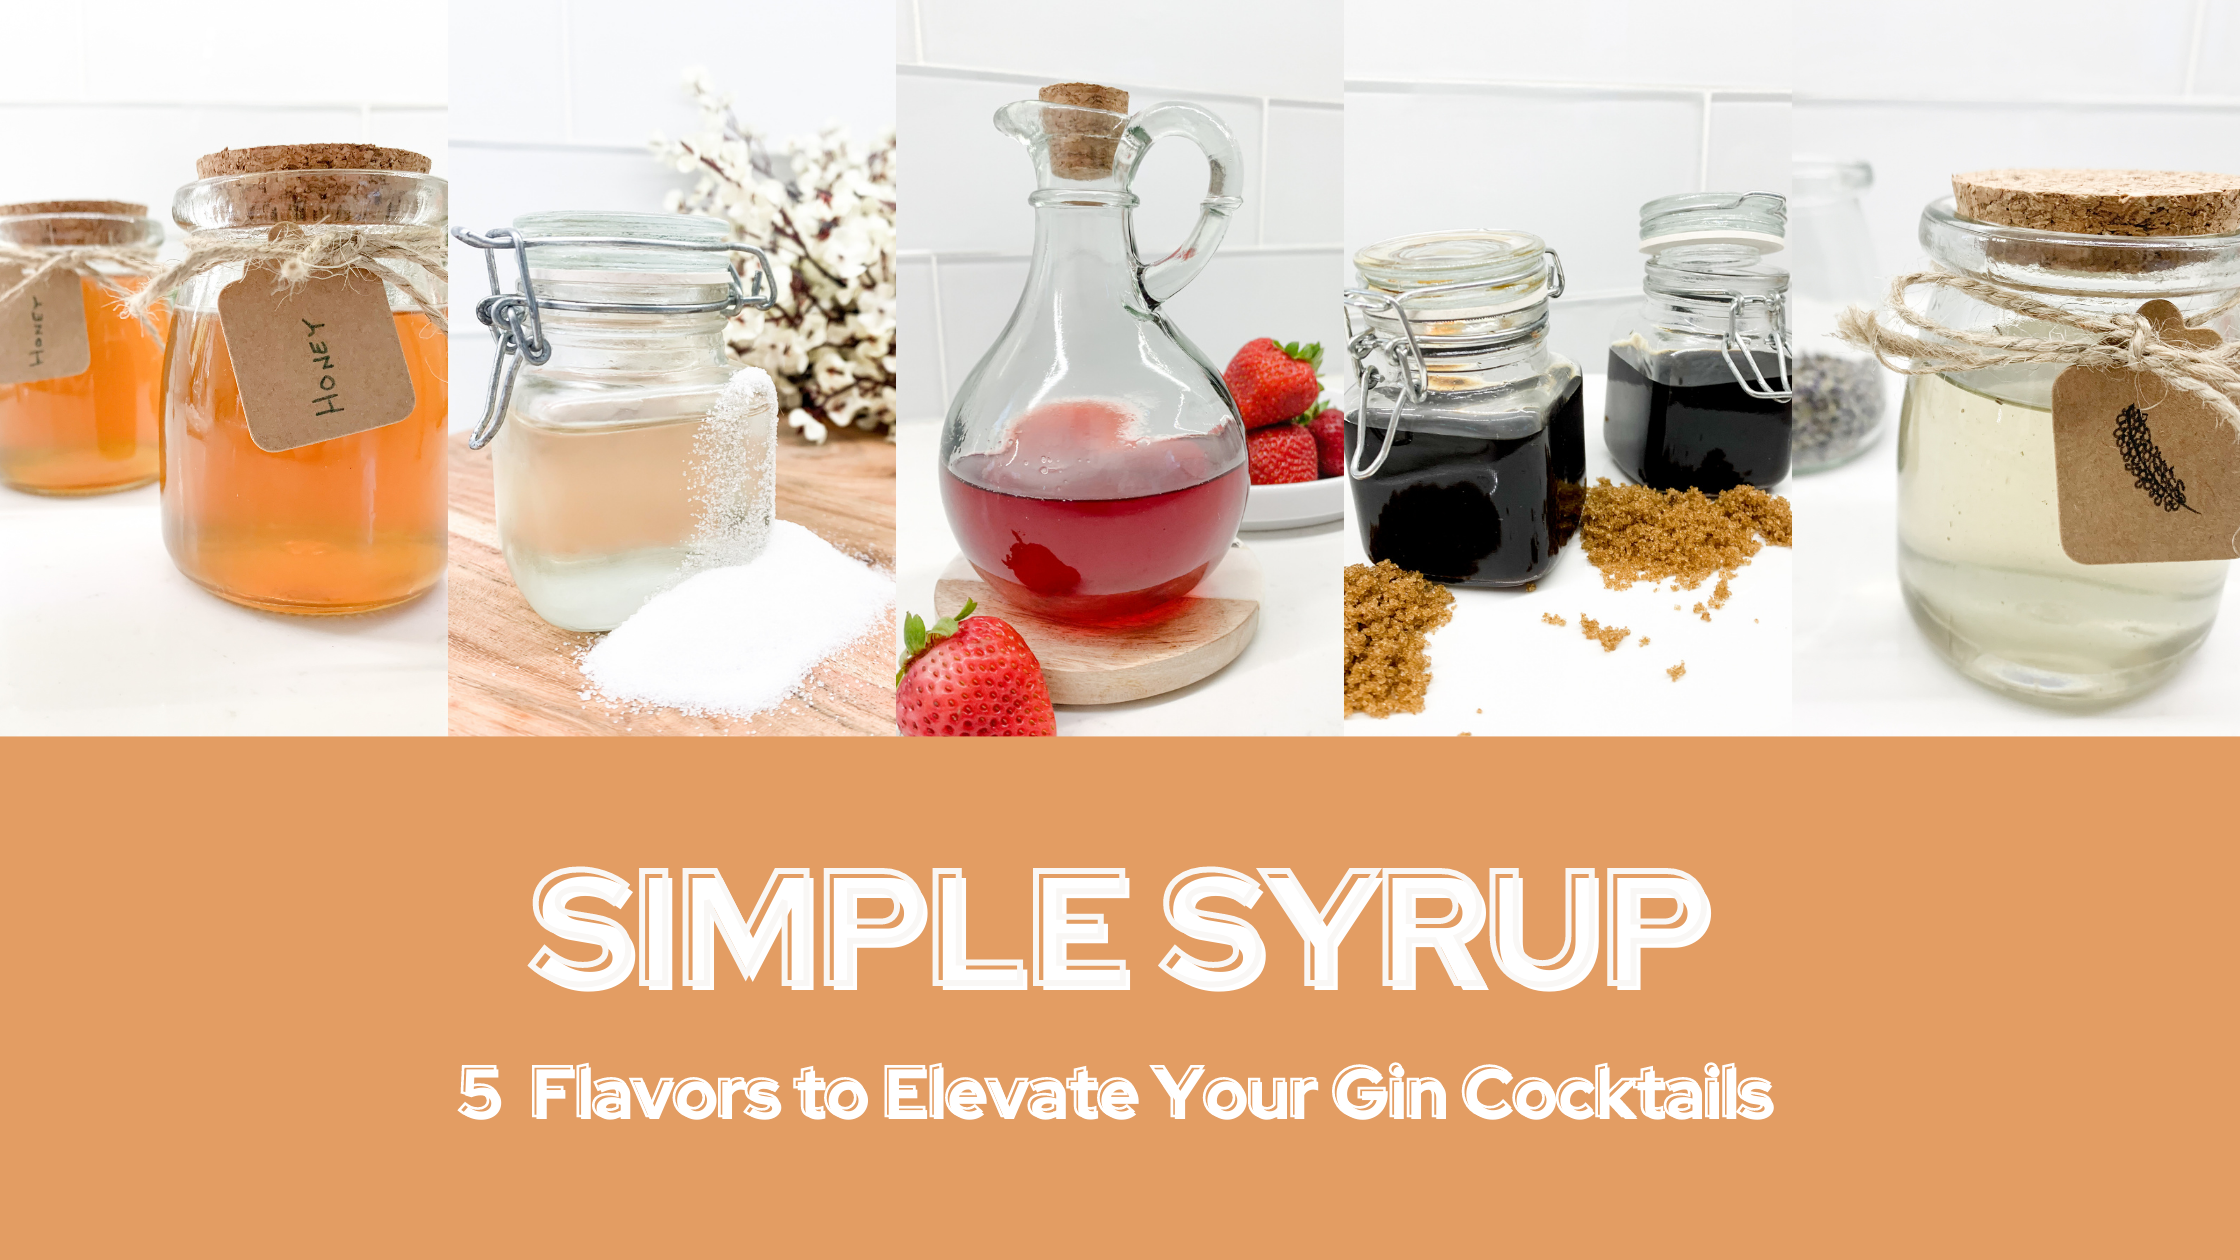 5 Flavored Simple Syrups to Elevate Your Gin Cocktails